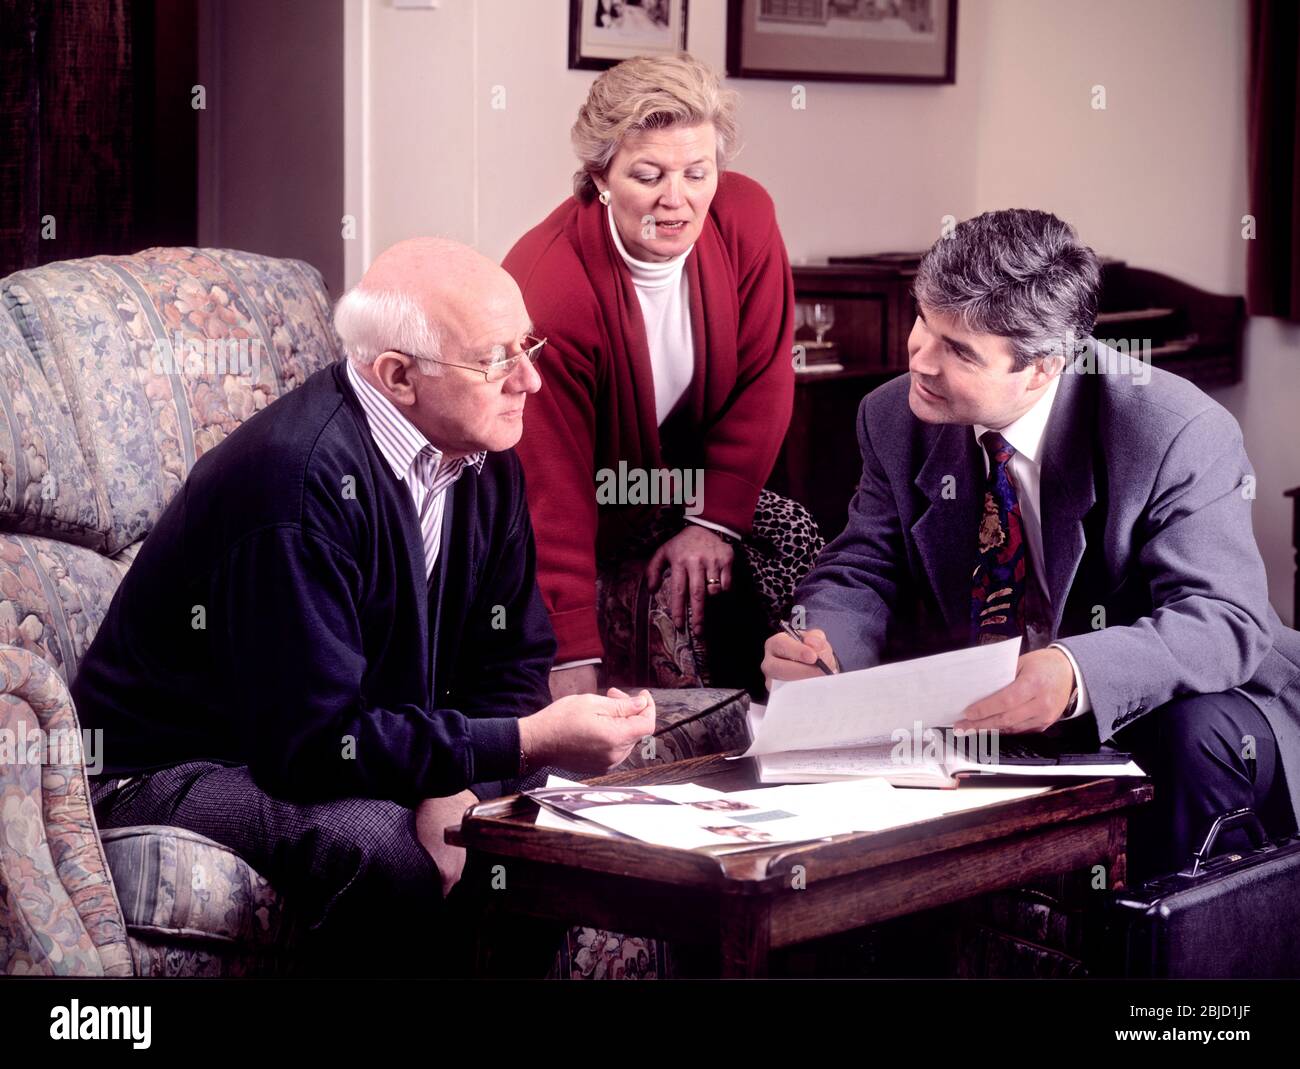 Mature retired elderly couple at home 1990s era, talking to salesman sales person man, with variety of paperwork on table. Financial planning, home improvements, legal services, will wills writing etc. Archive 1990's home services salesman Stock Photo